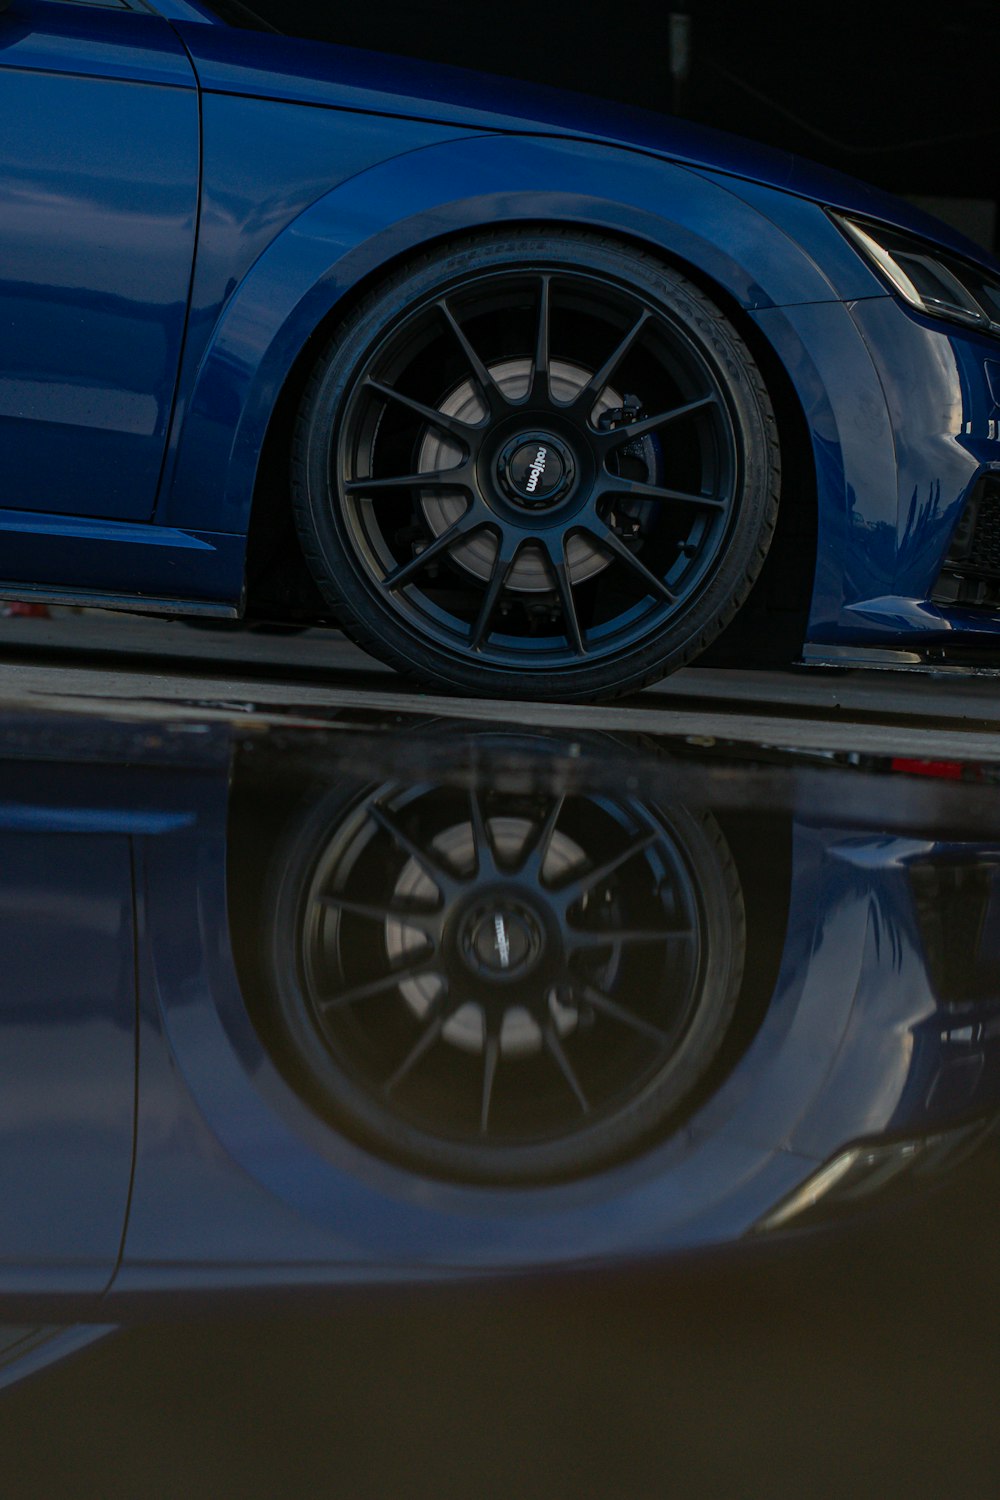 a close up of a blue sports car on a reflective surface